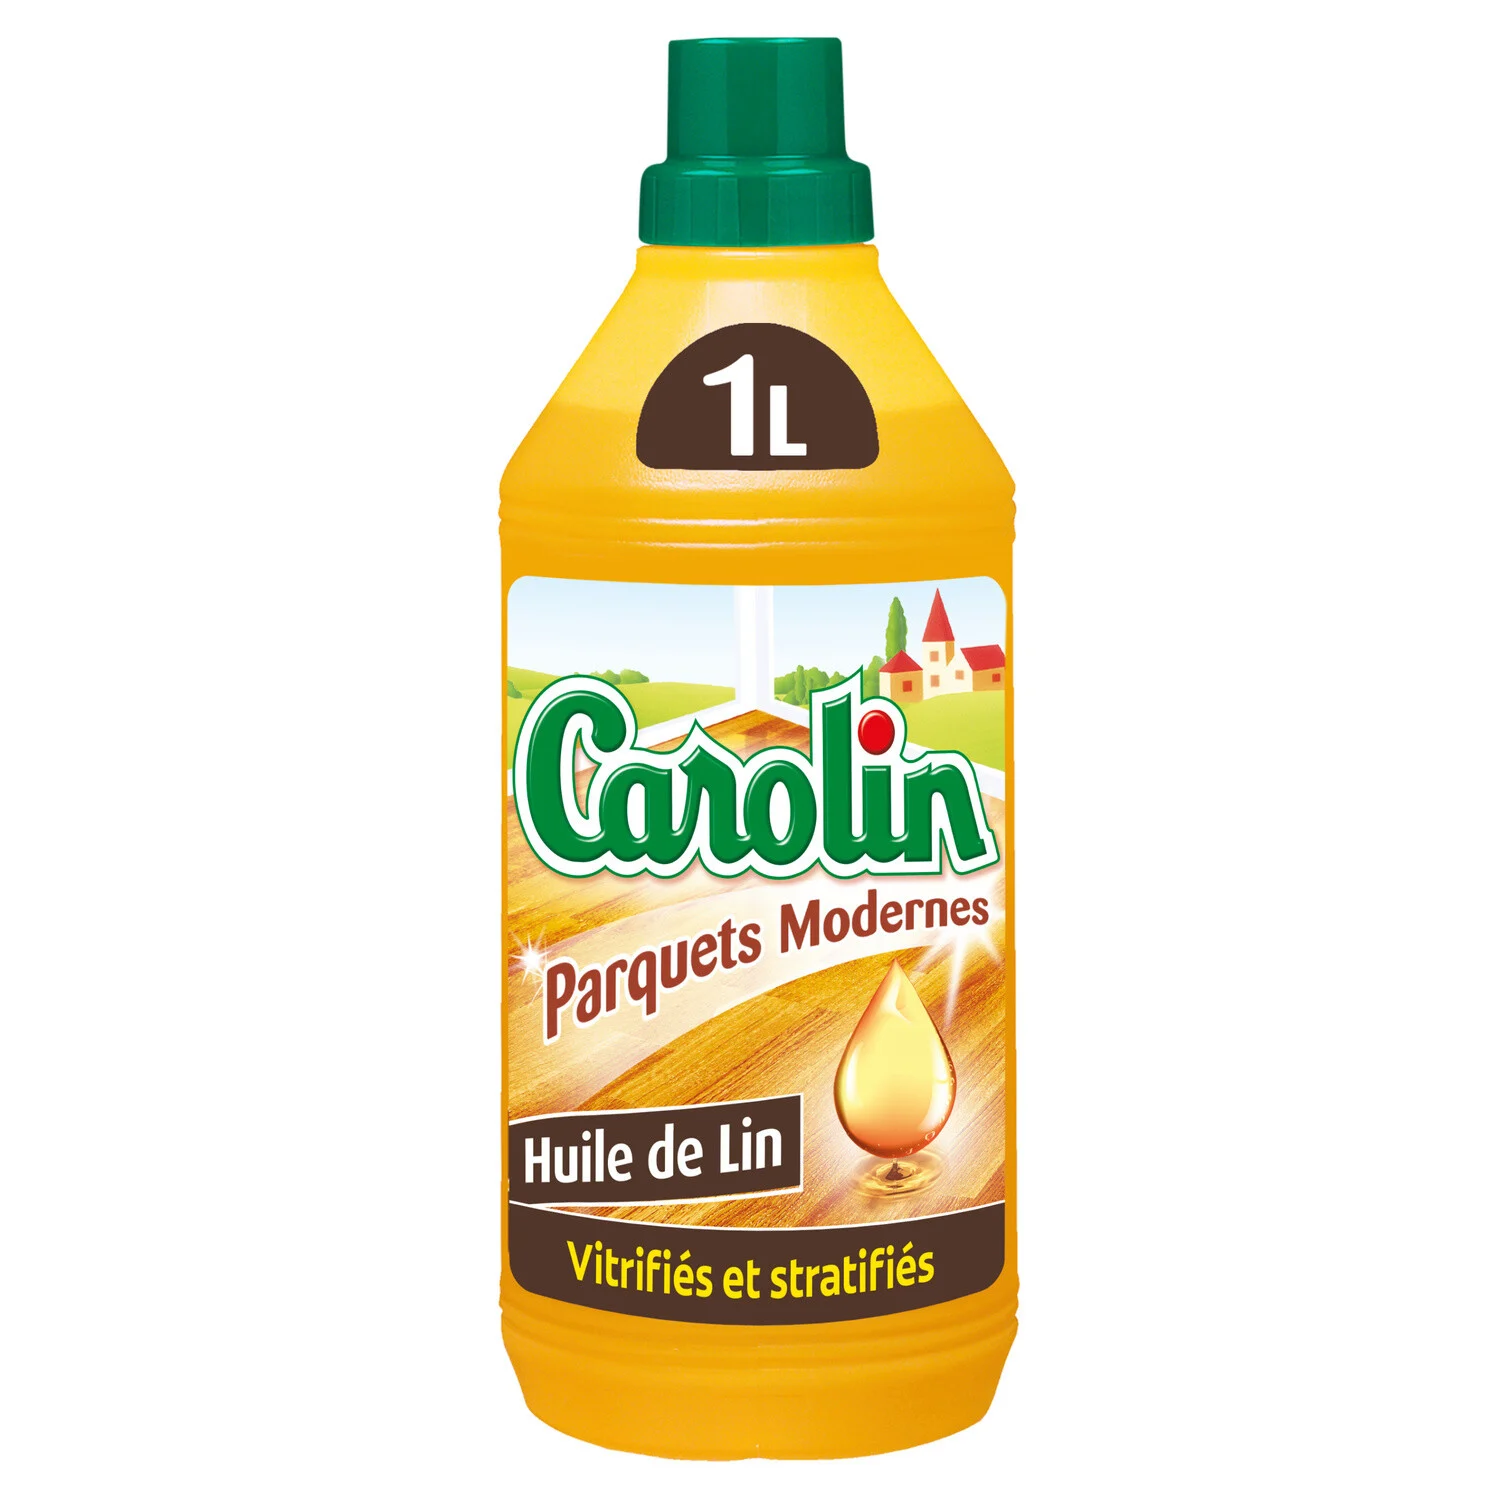 Carolin Laminate flooring cleaner with extract of Linseed oil 1L